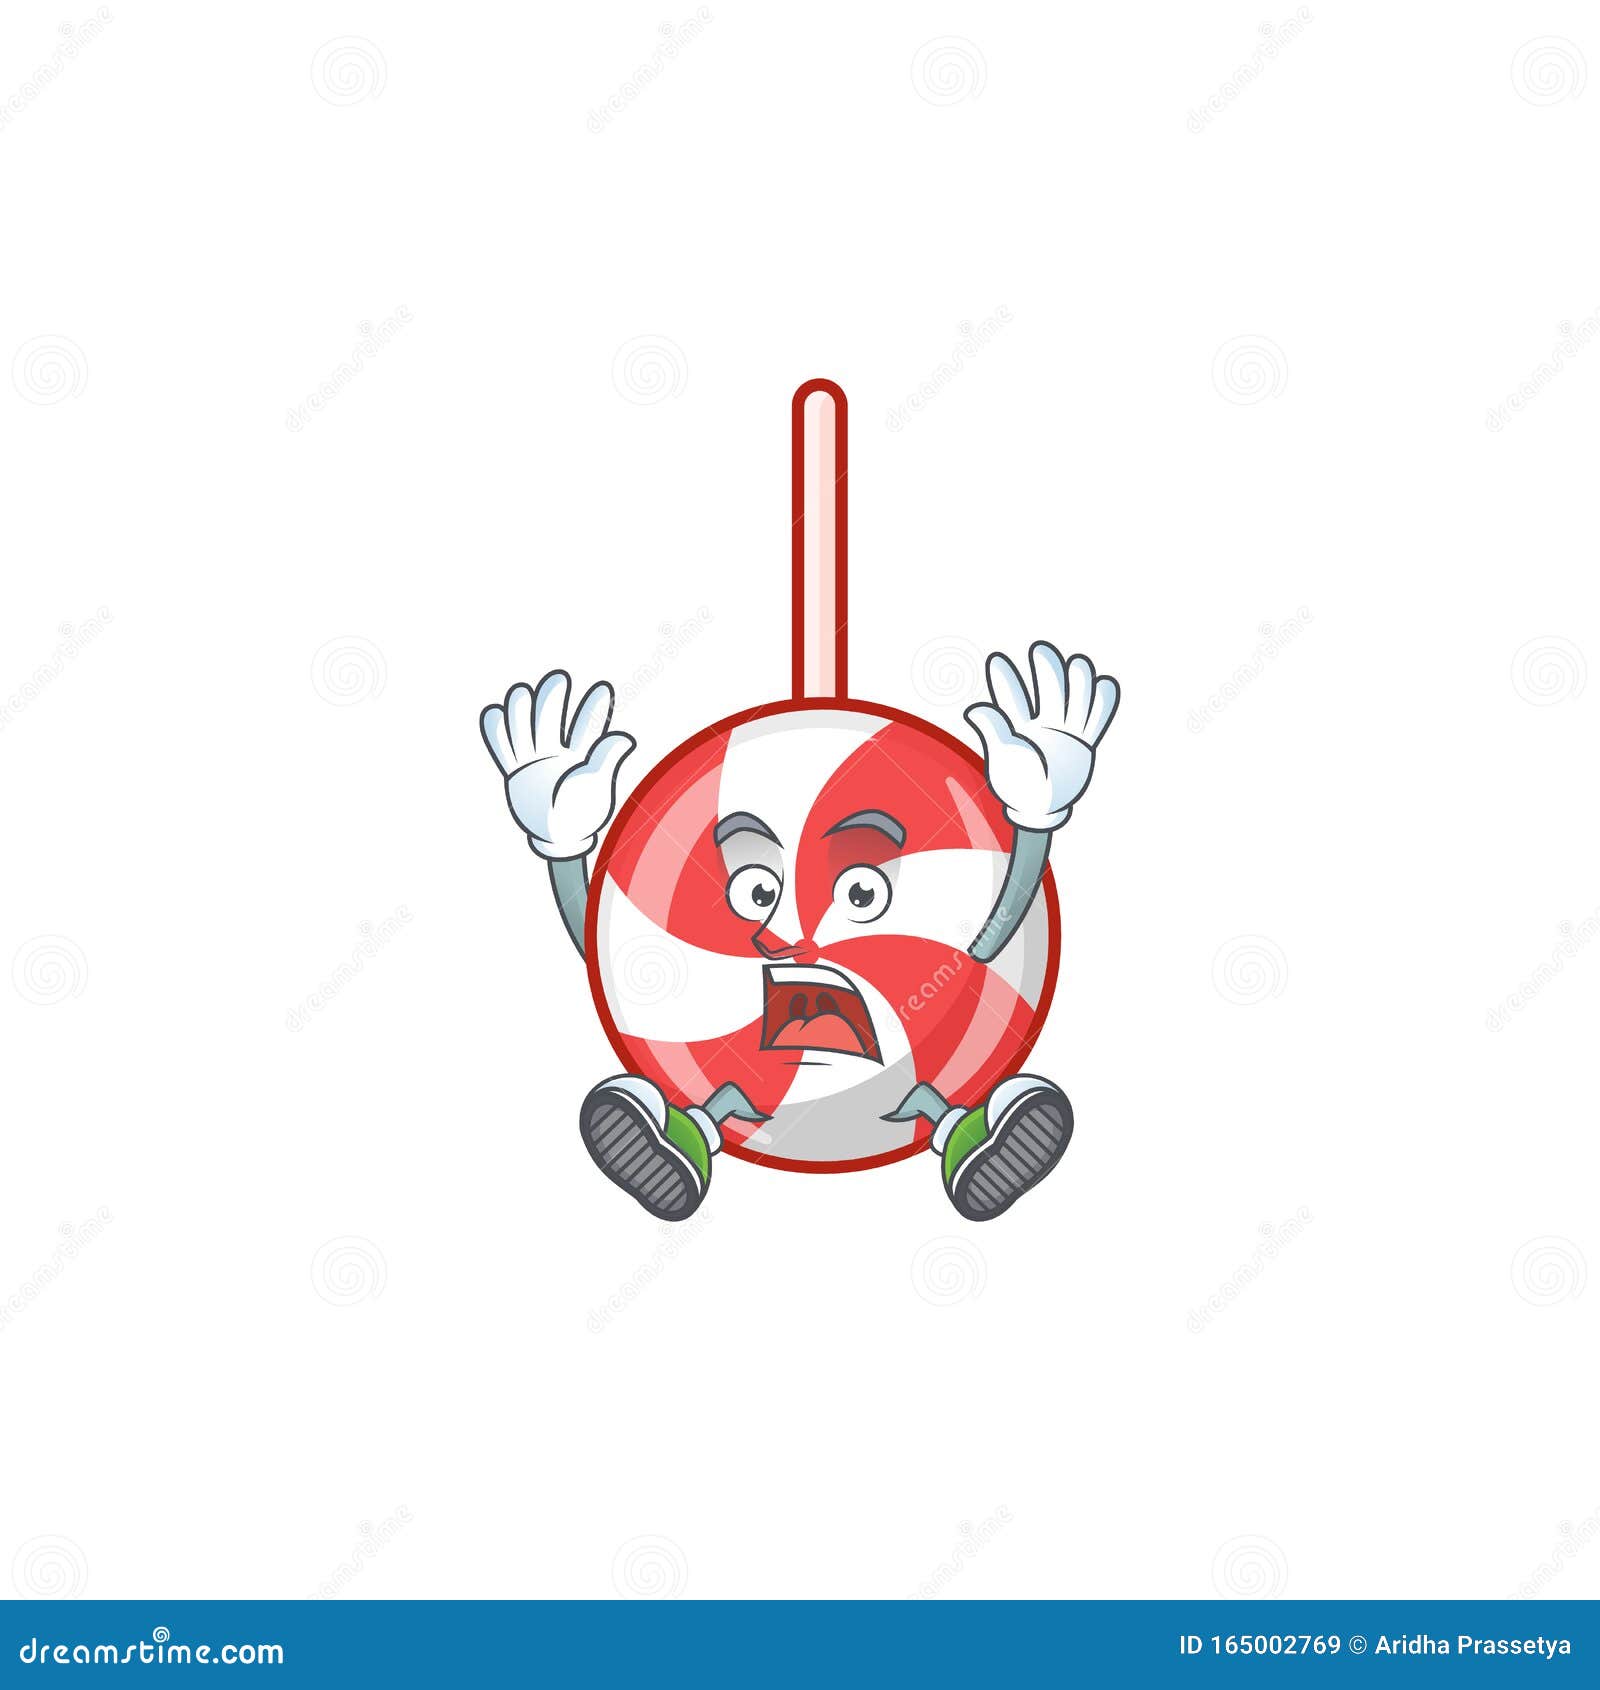 Cute Striped Peppermint Candy Cartoon Character Style with Shocking Gesture  Stock Vector - Illustration of ornament, progress: 165002769